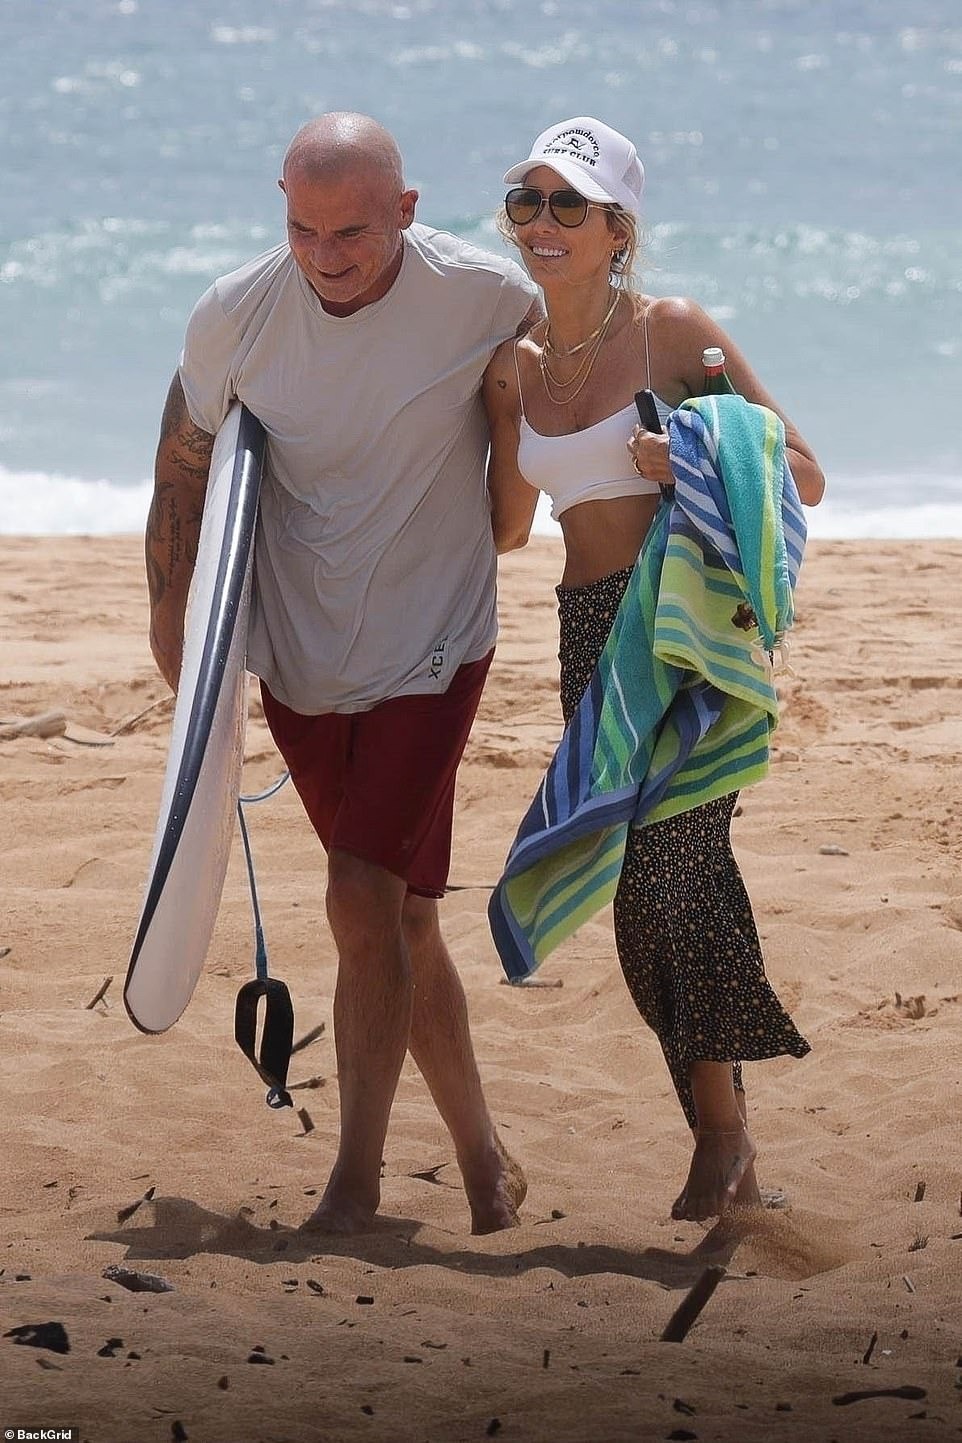 Miley Cyrus wears a bikini and competes with her U60 biological mother, photo 13